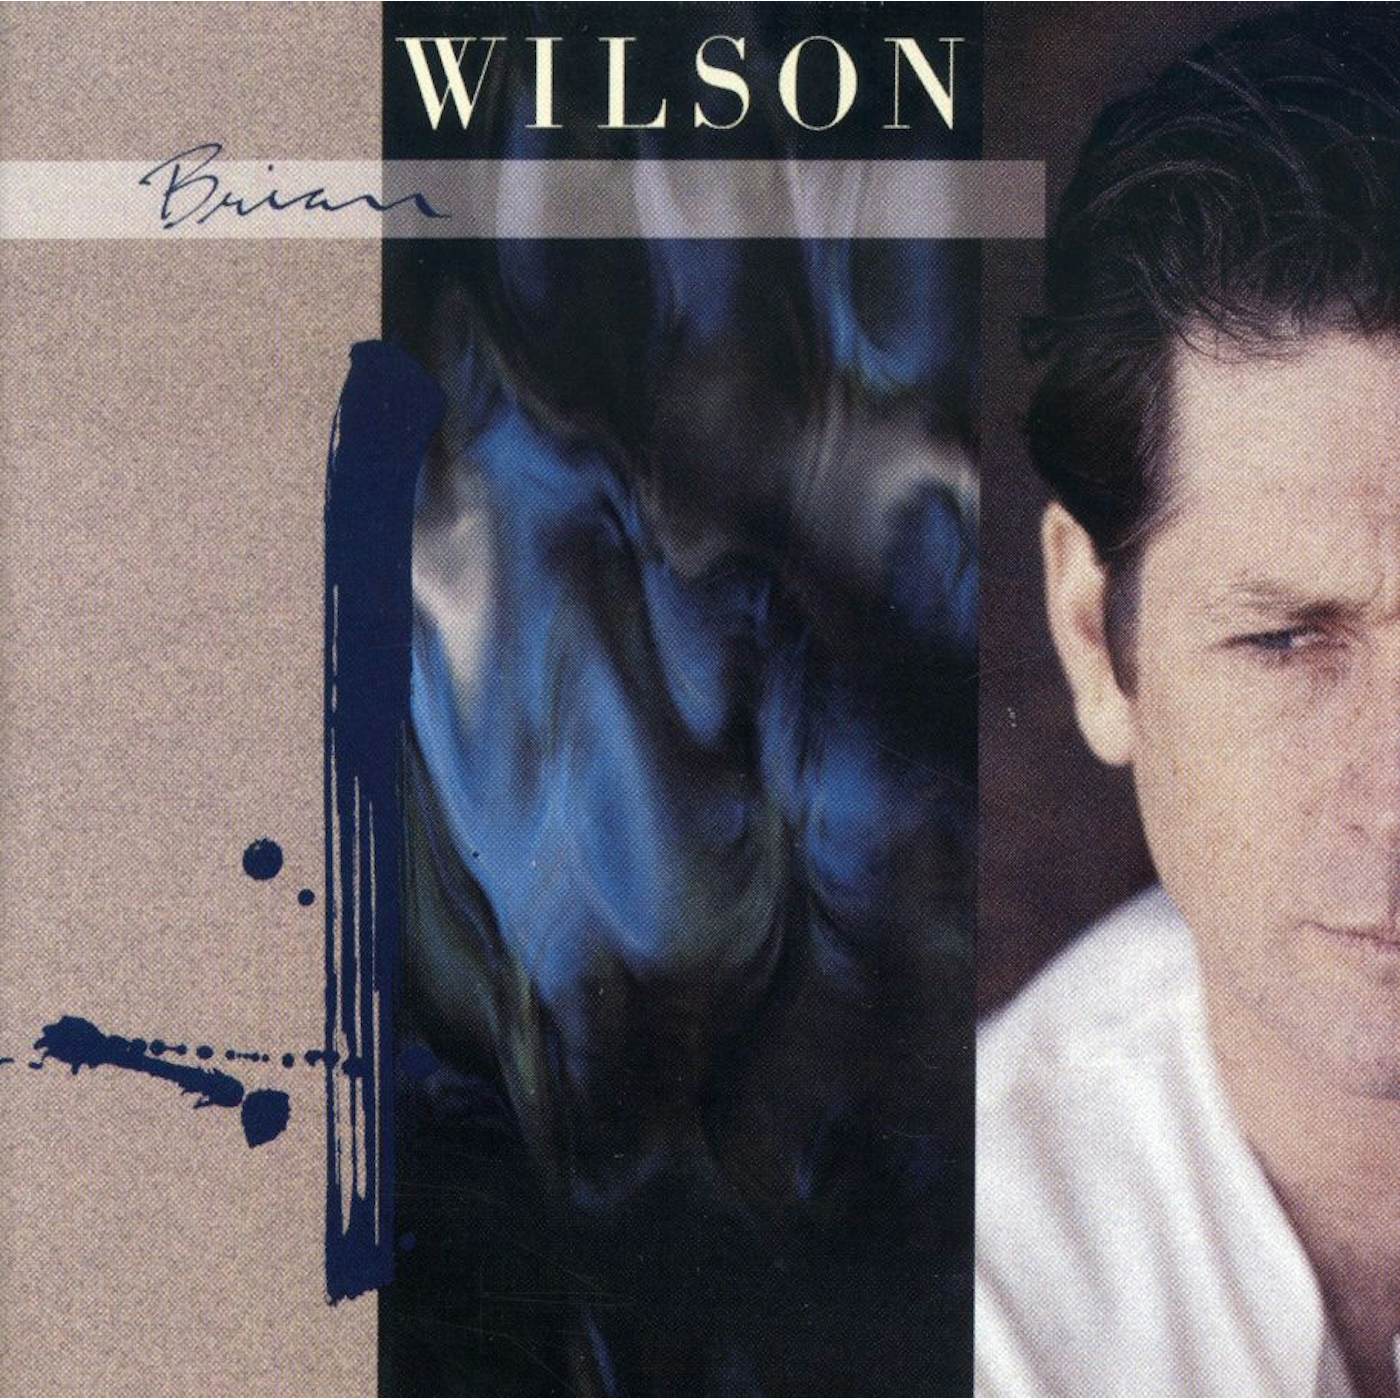 BRIAN WILSON (EXPANDED EDITION) CD